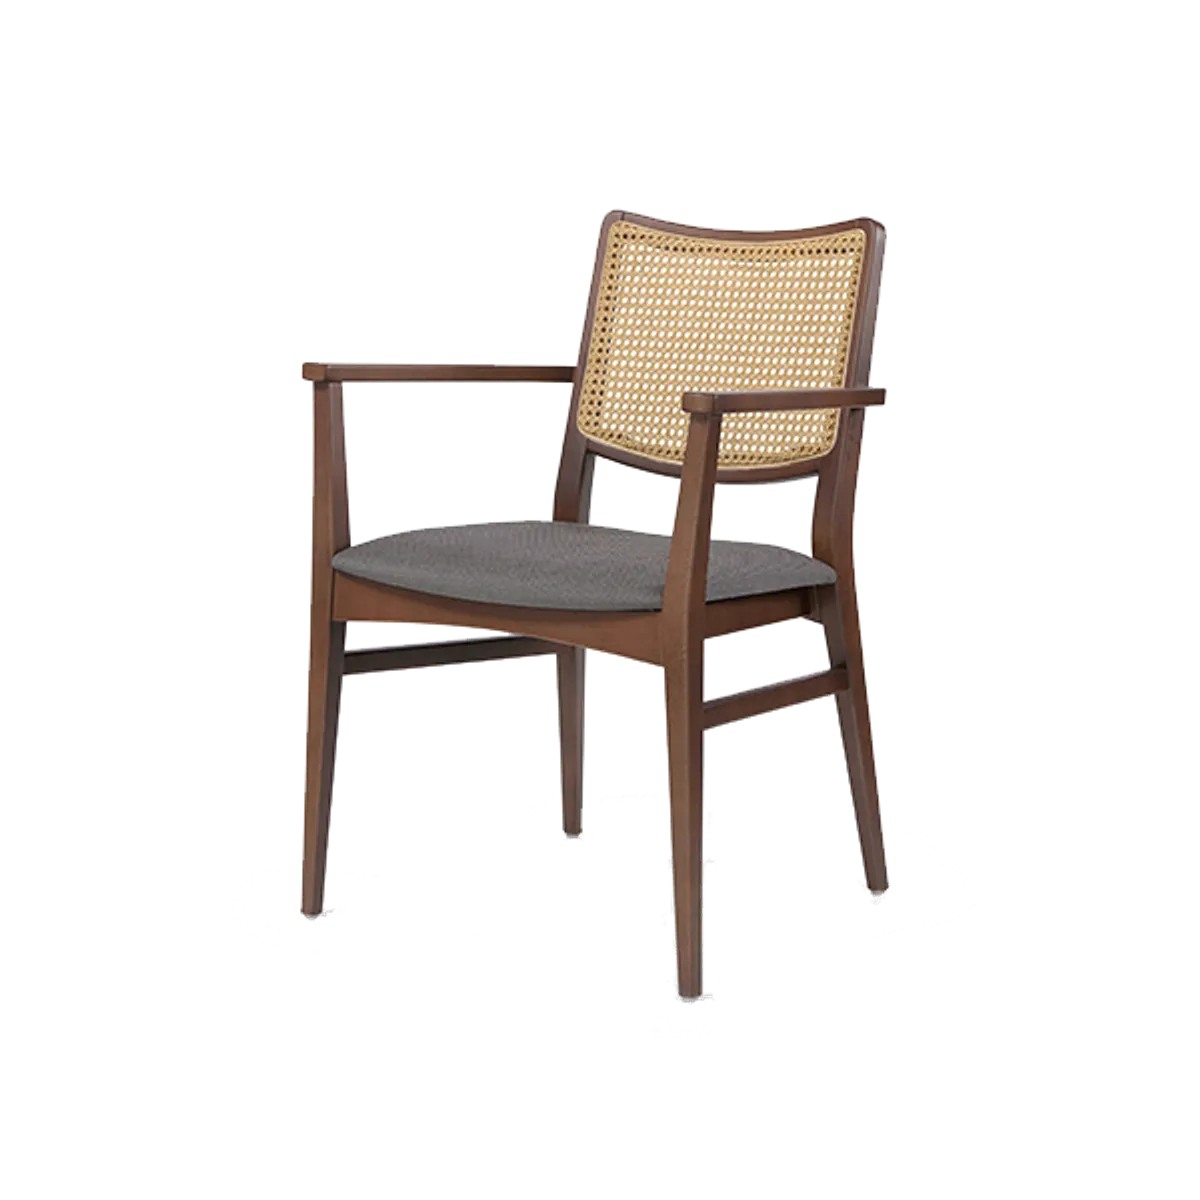 Spirit Cane Back Armchair Inside Out Contracts